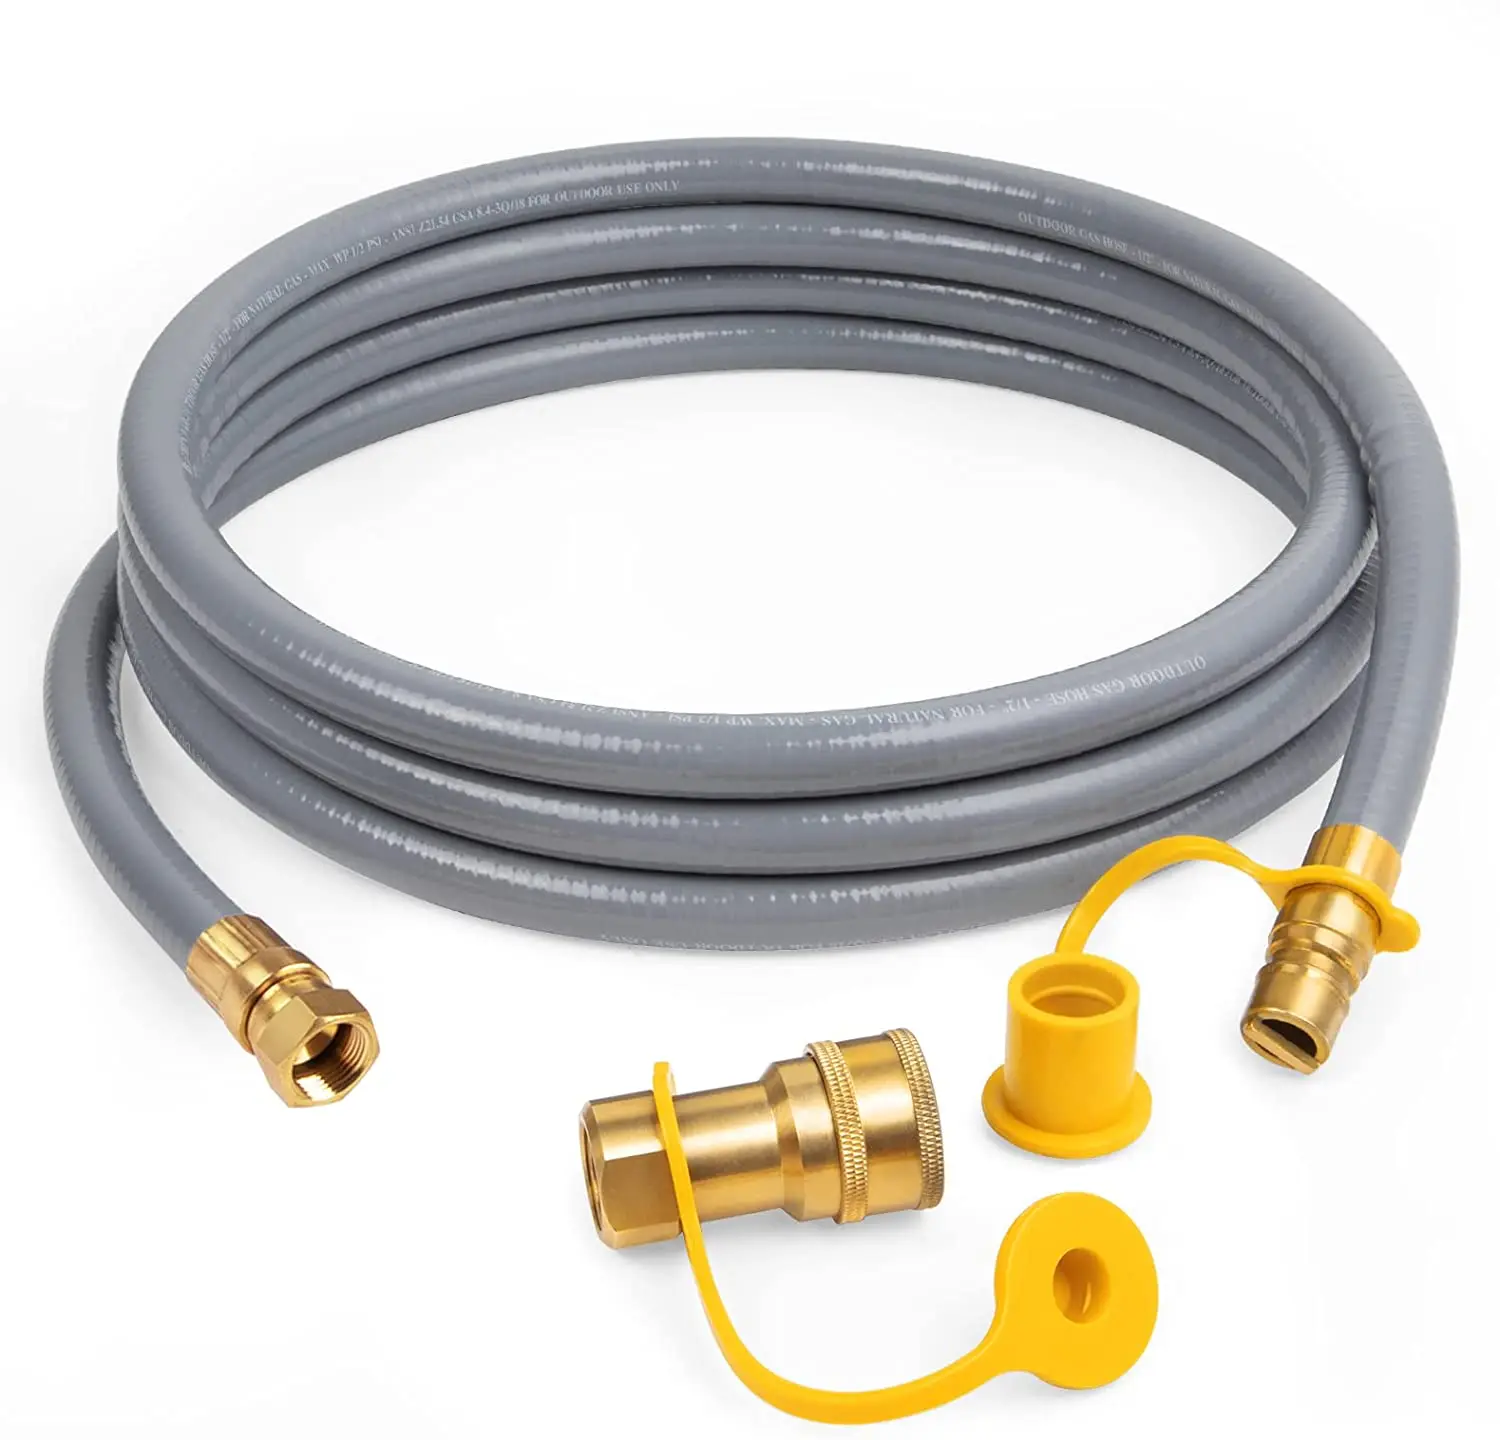 

3/8-Inch Natural Gas Quick Connect Hose, Propane to Natural Gas Conversion Kit for Grill, Smoker, Fire Pit, Patio Heater and Mor